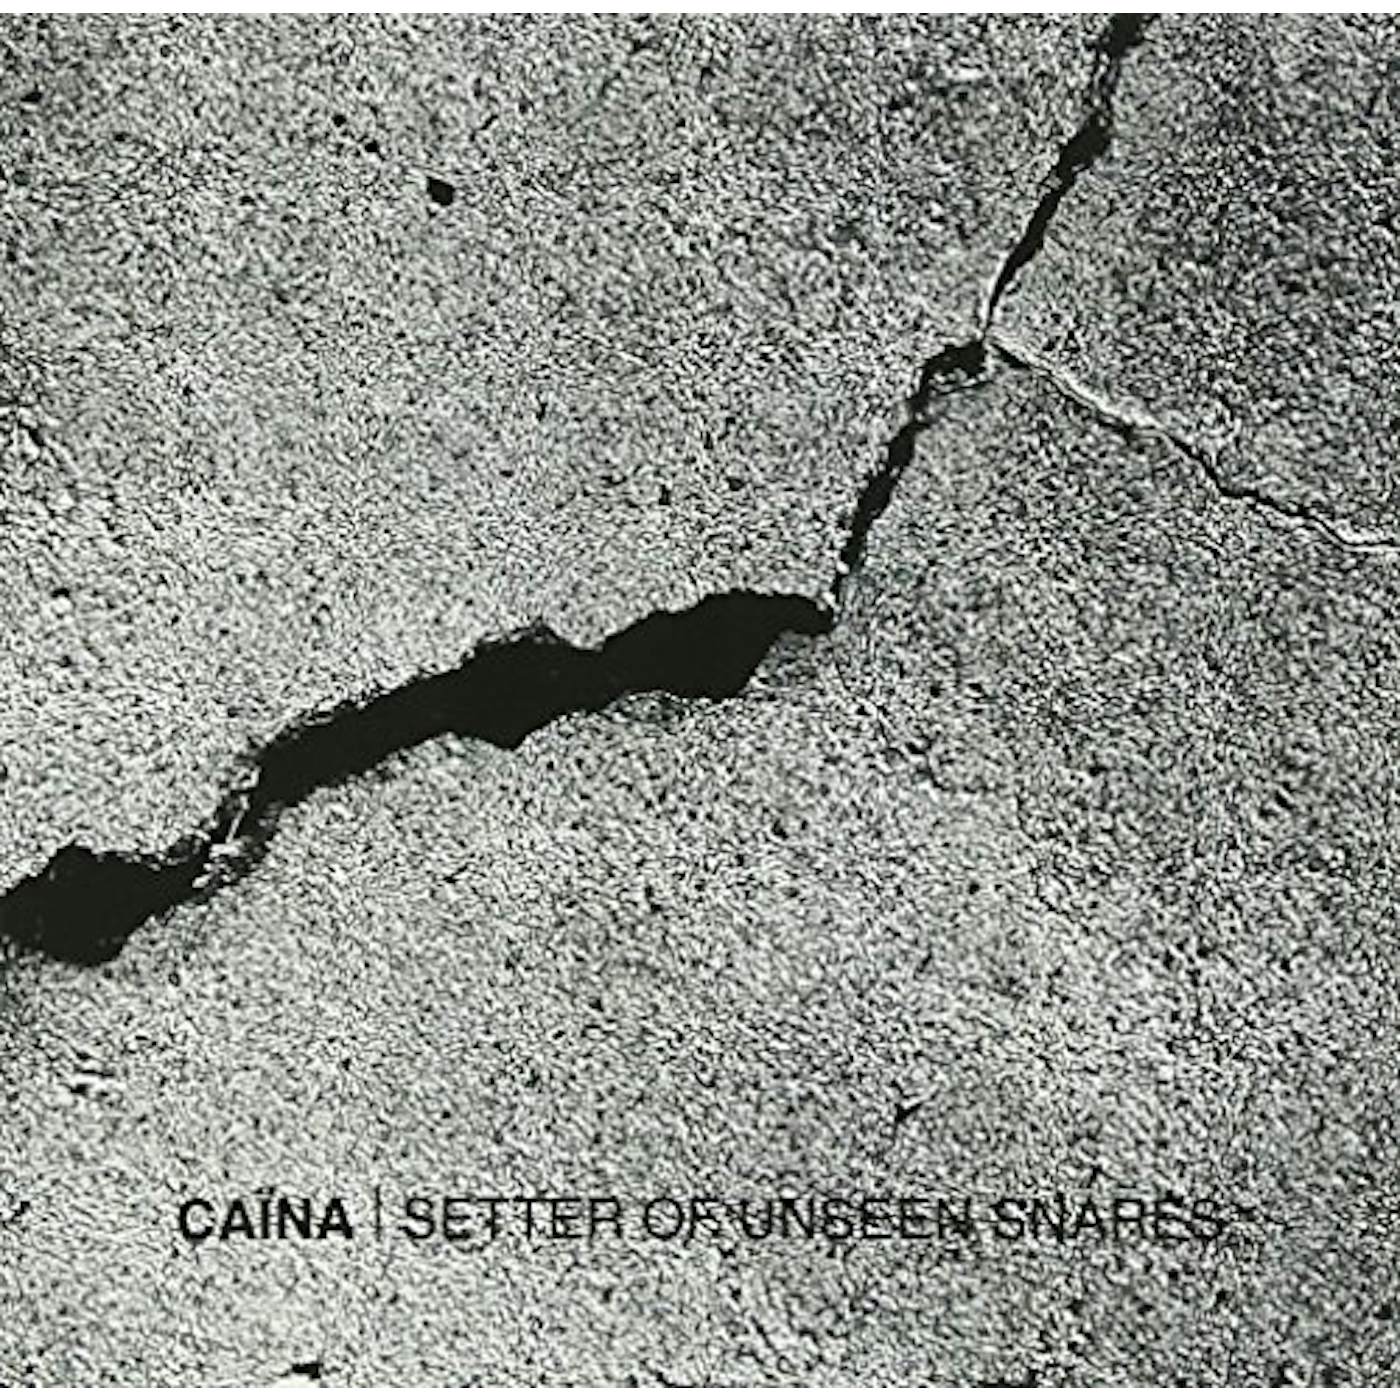 Caina SETTER OF UNSEEN SNARES CD